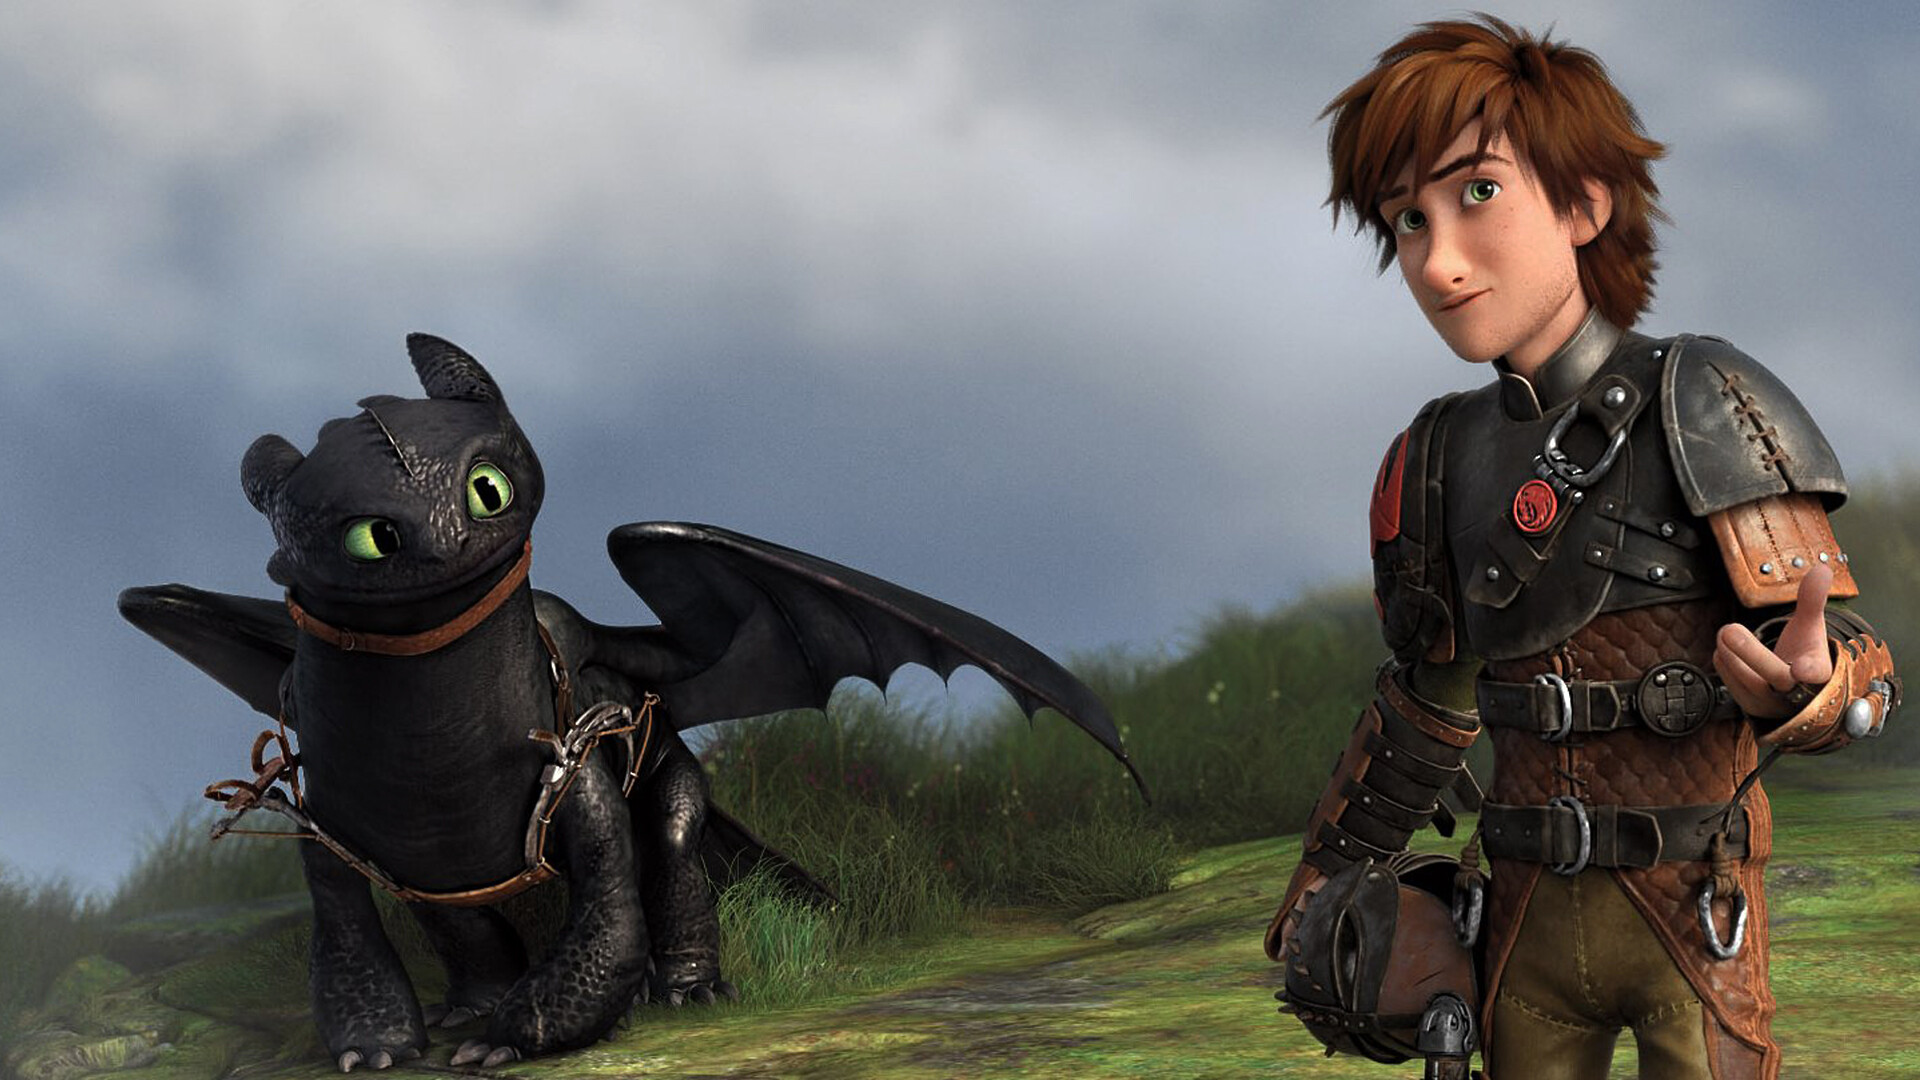 How to Train Your Dragon: Hiccup, an undersized teen wishing to become a dragon slayer like the other Vikings. 1920x1080 Full HD Background.